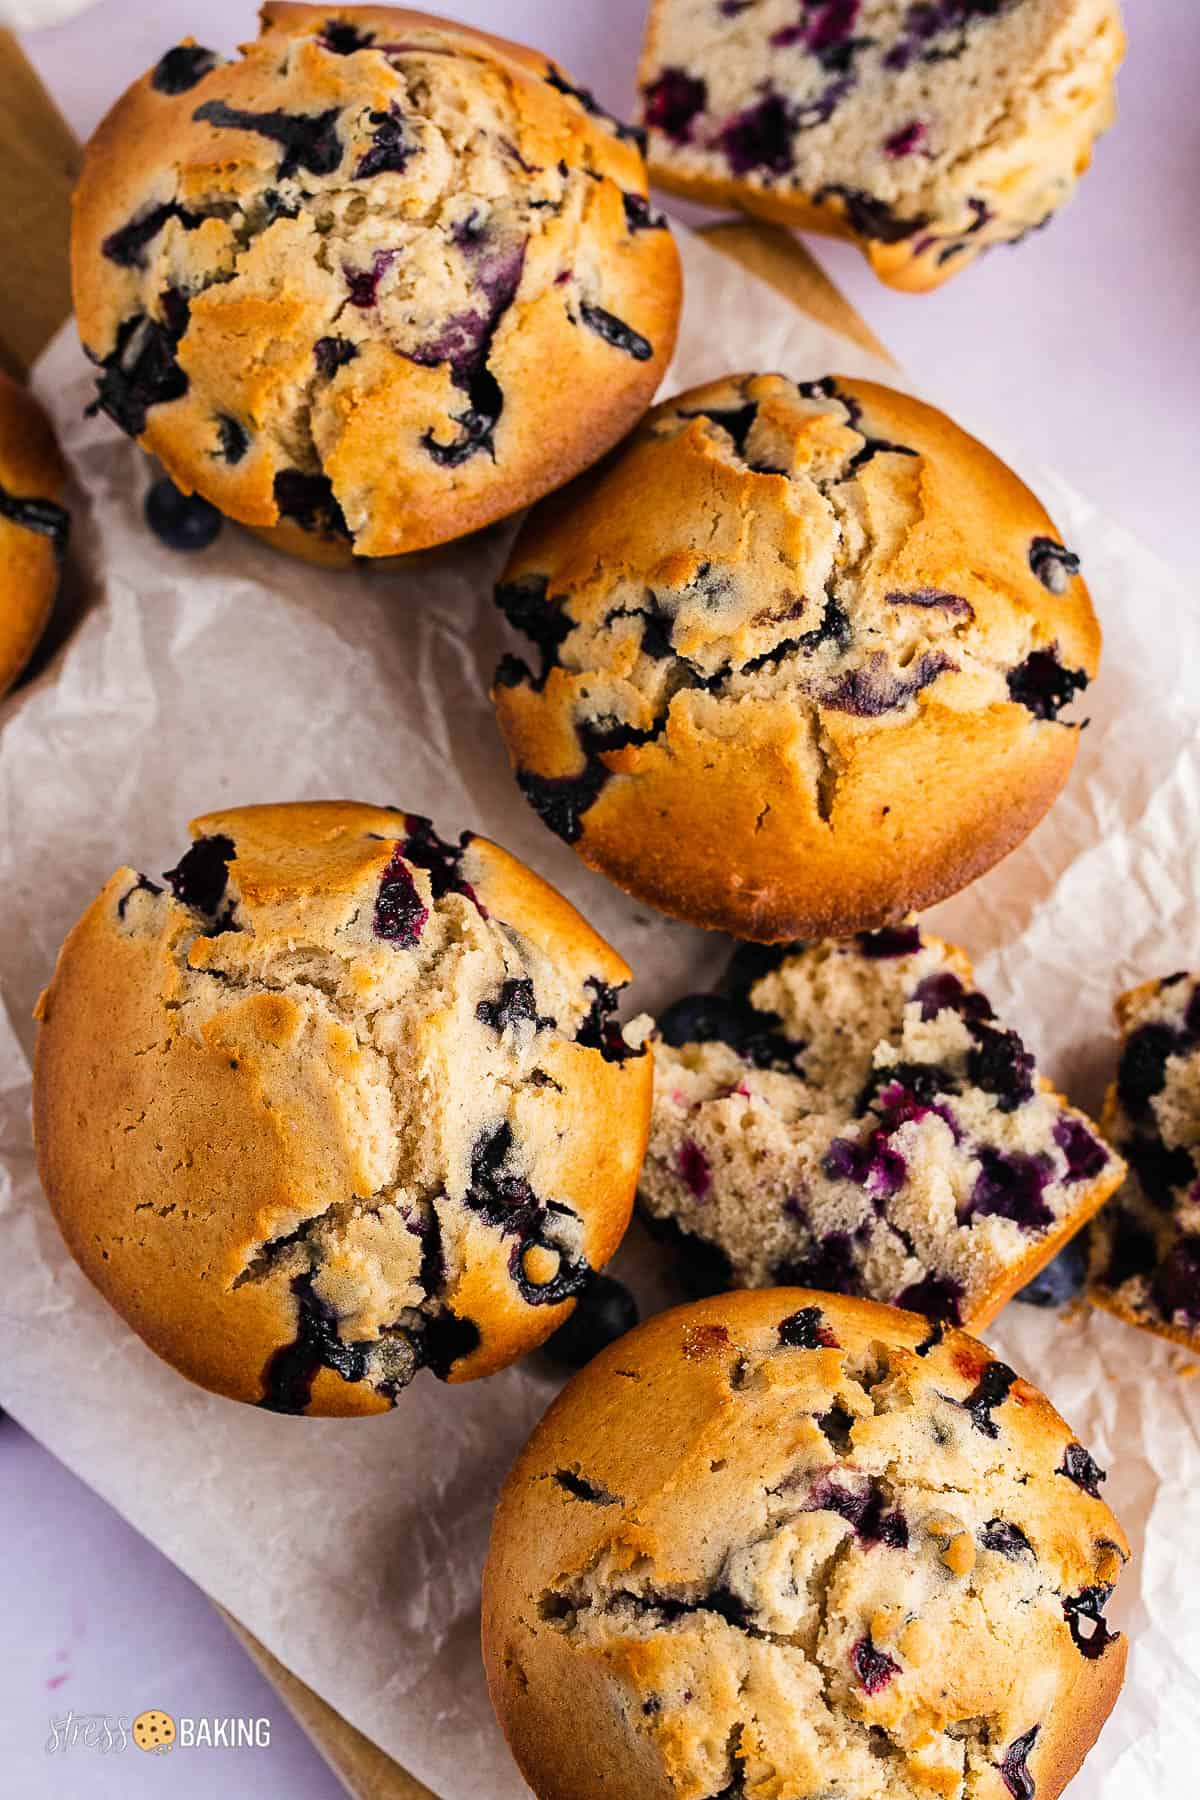 Big blueberry muffins with golden brown tops on parchment paper